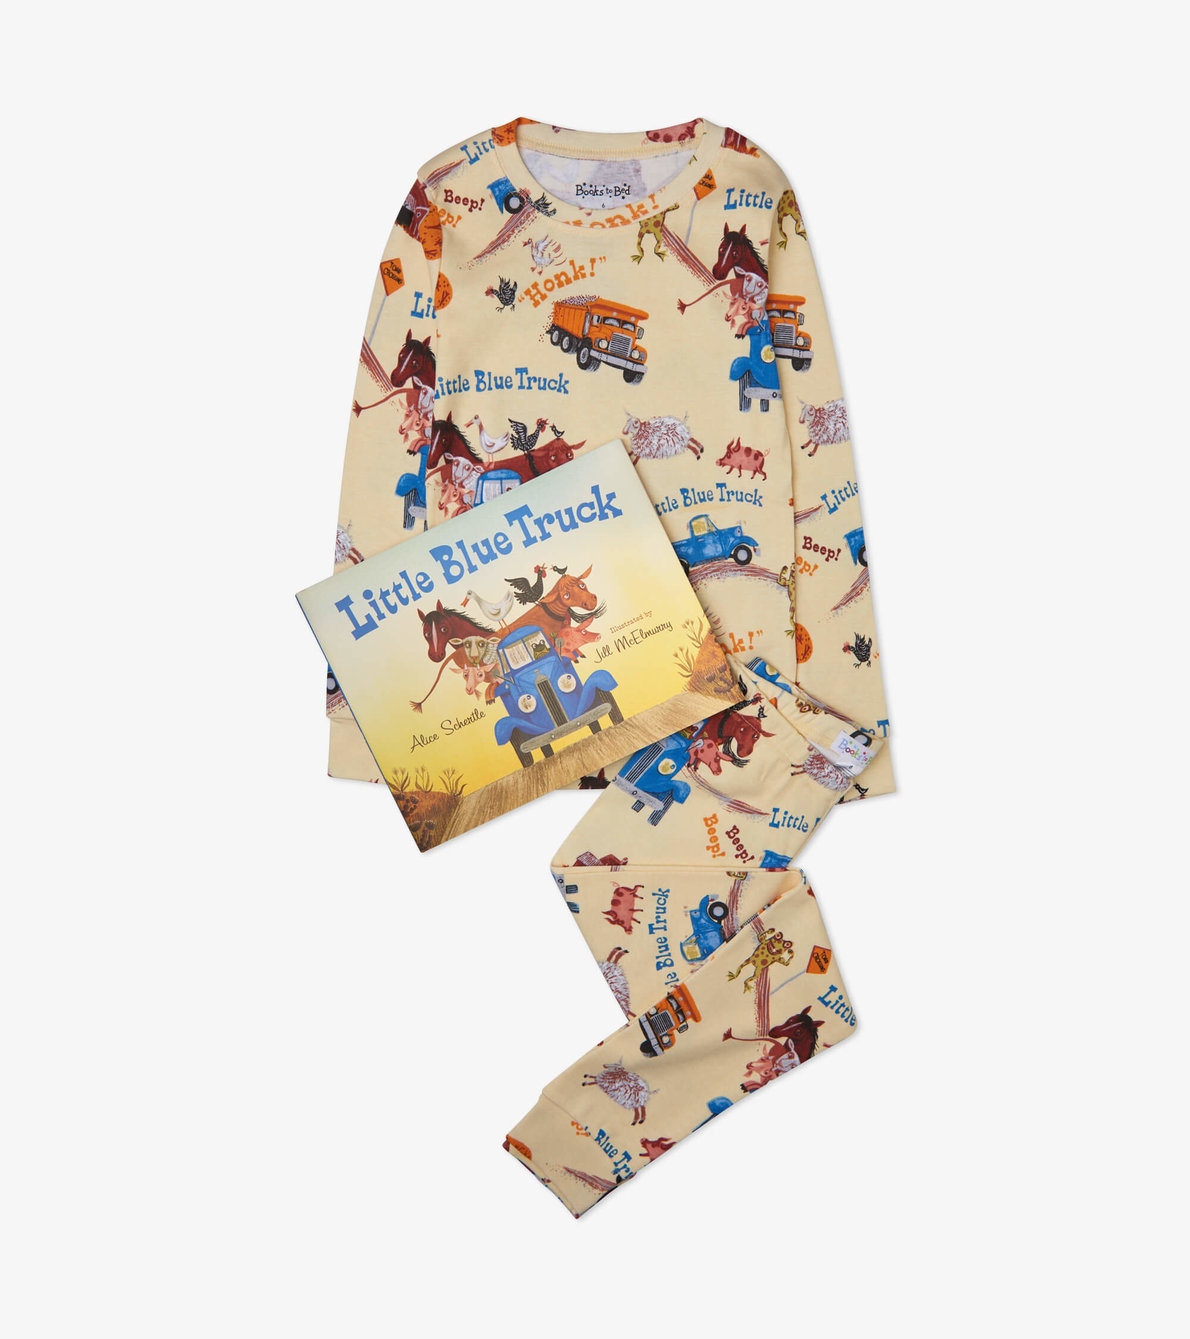 View larger image of Little Blue Truck Book and Pajama Set